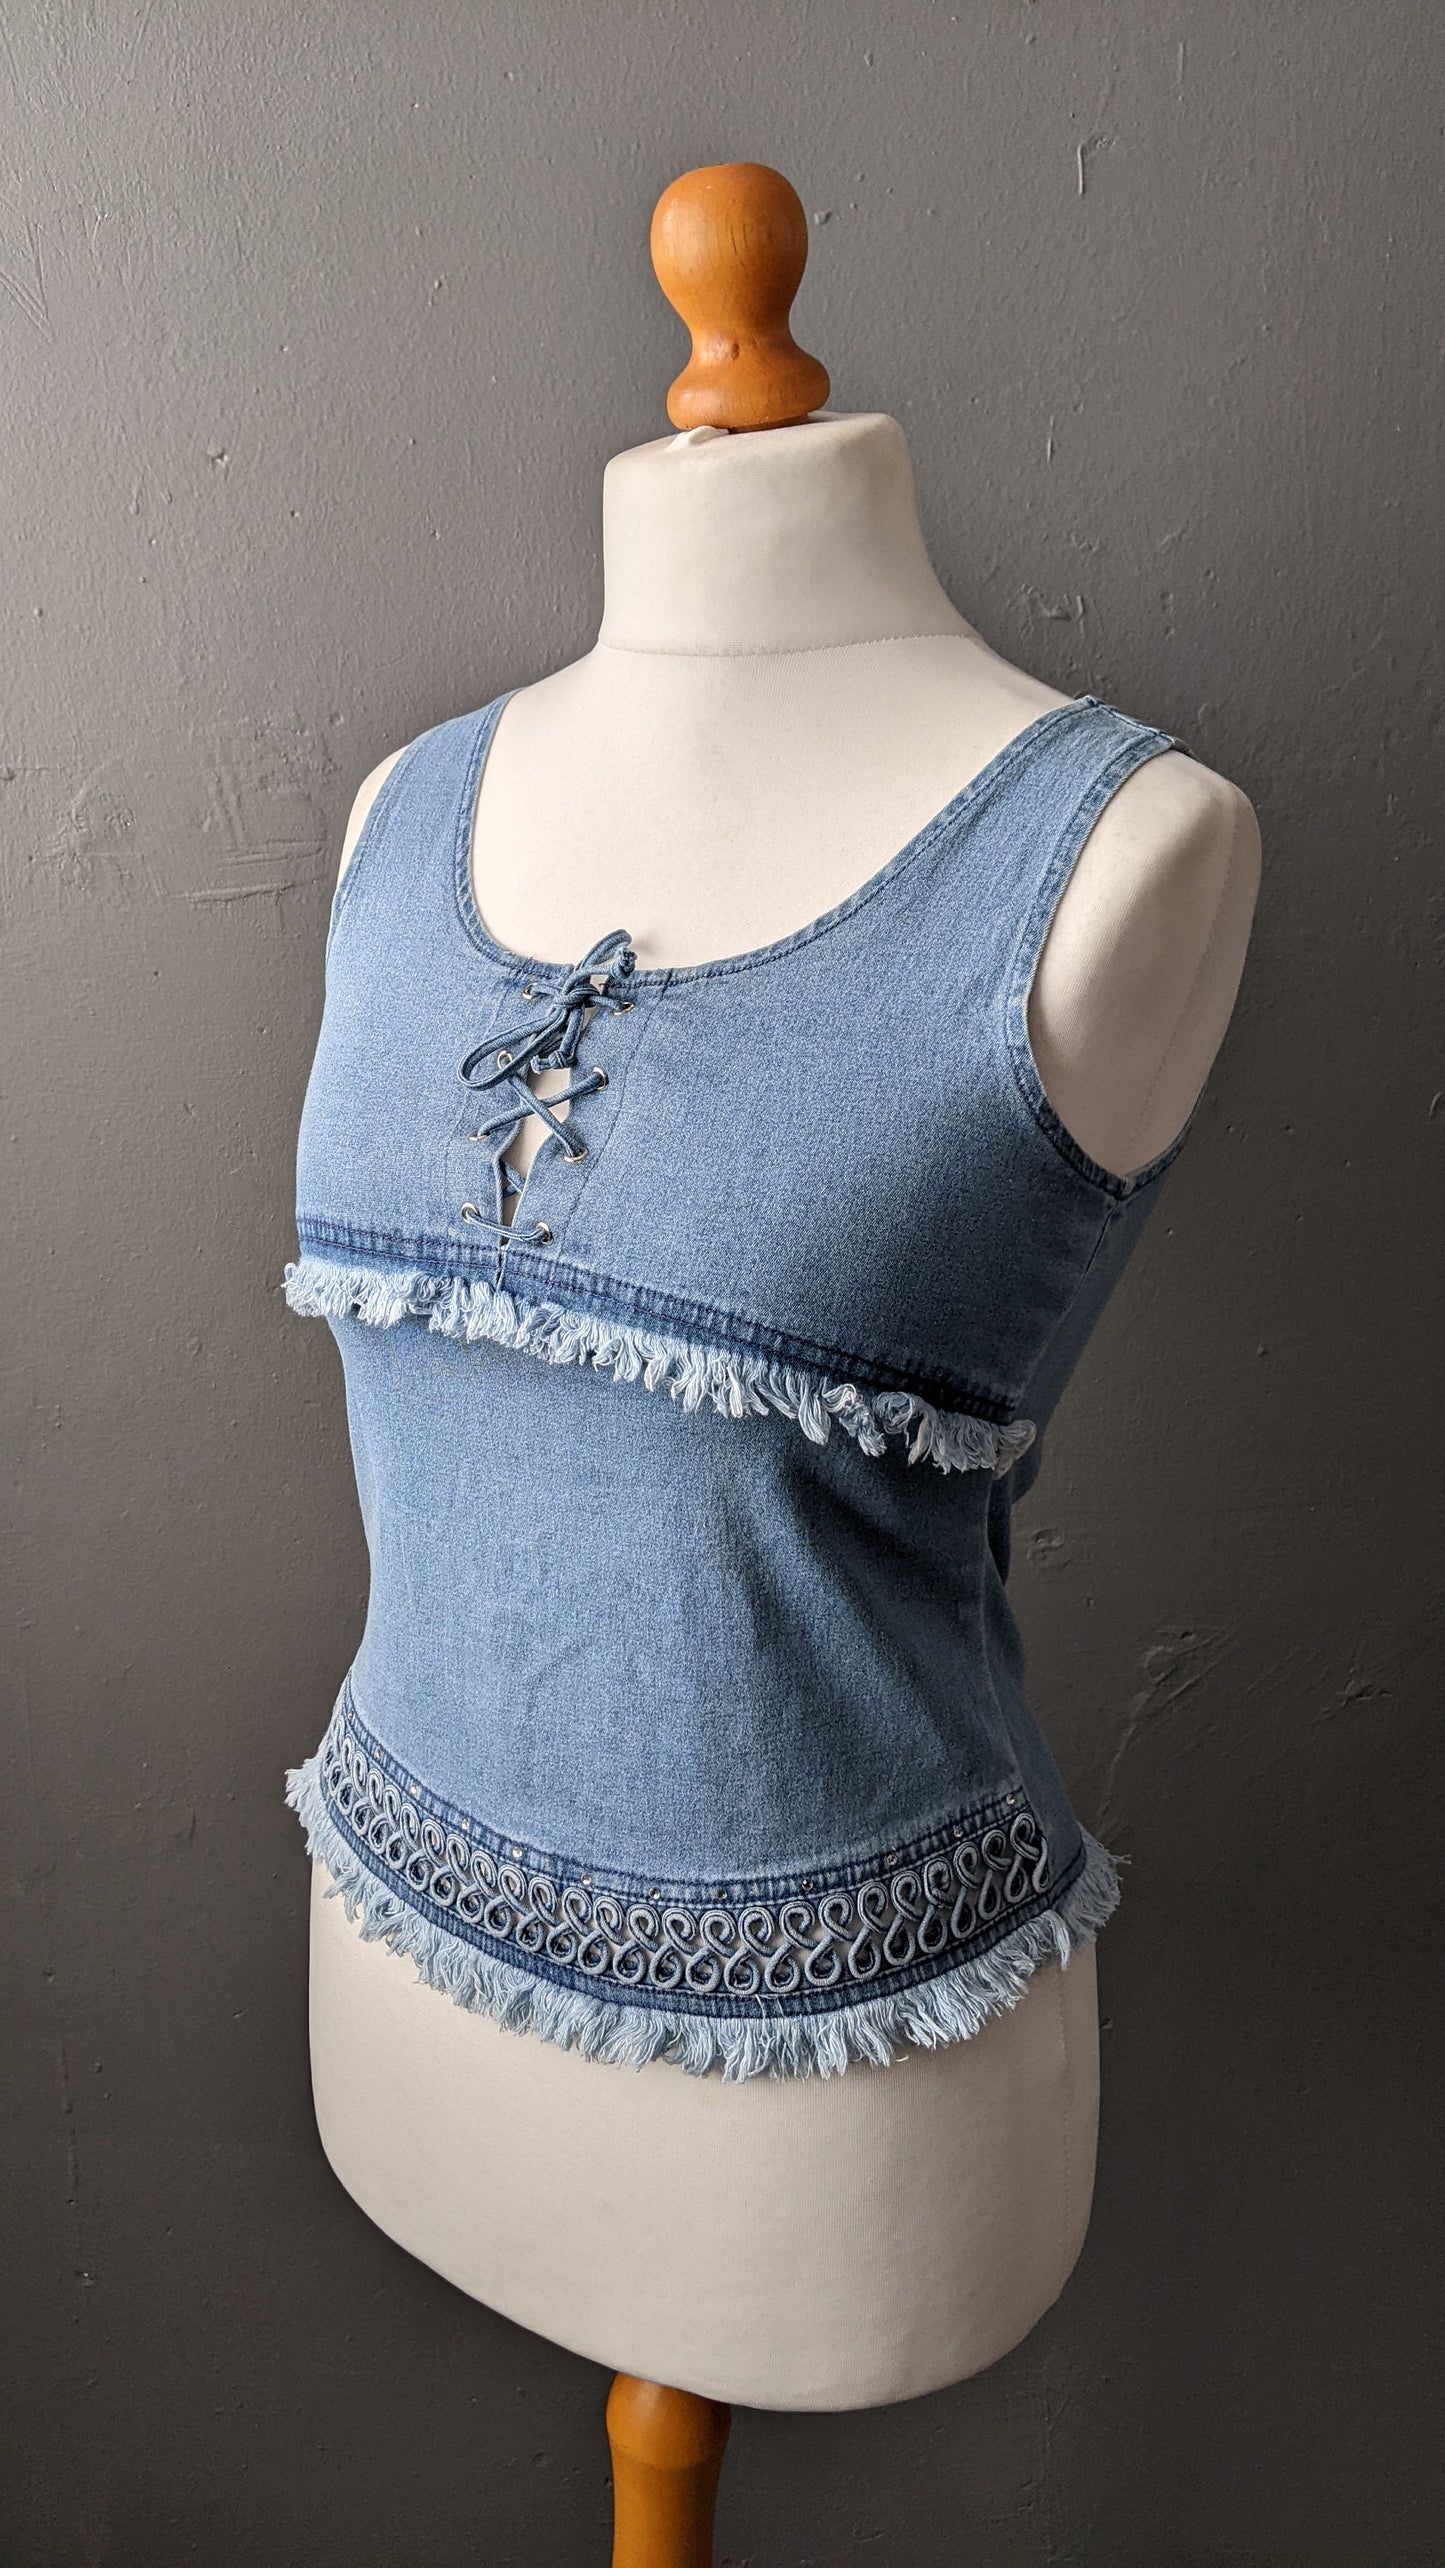 Vintage 90s Denim Vest Top with Bohemian Piping, Size Small